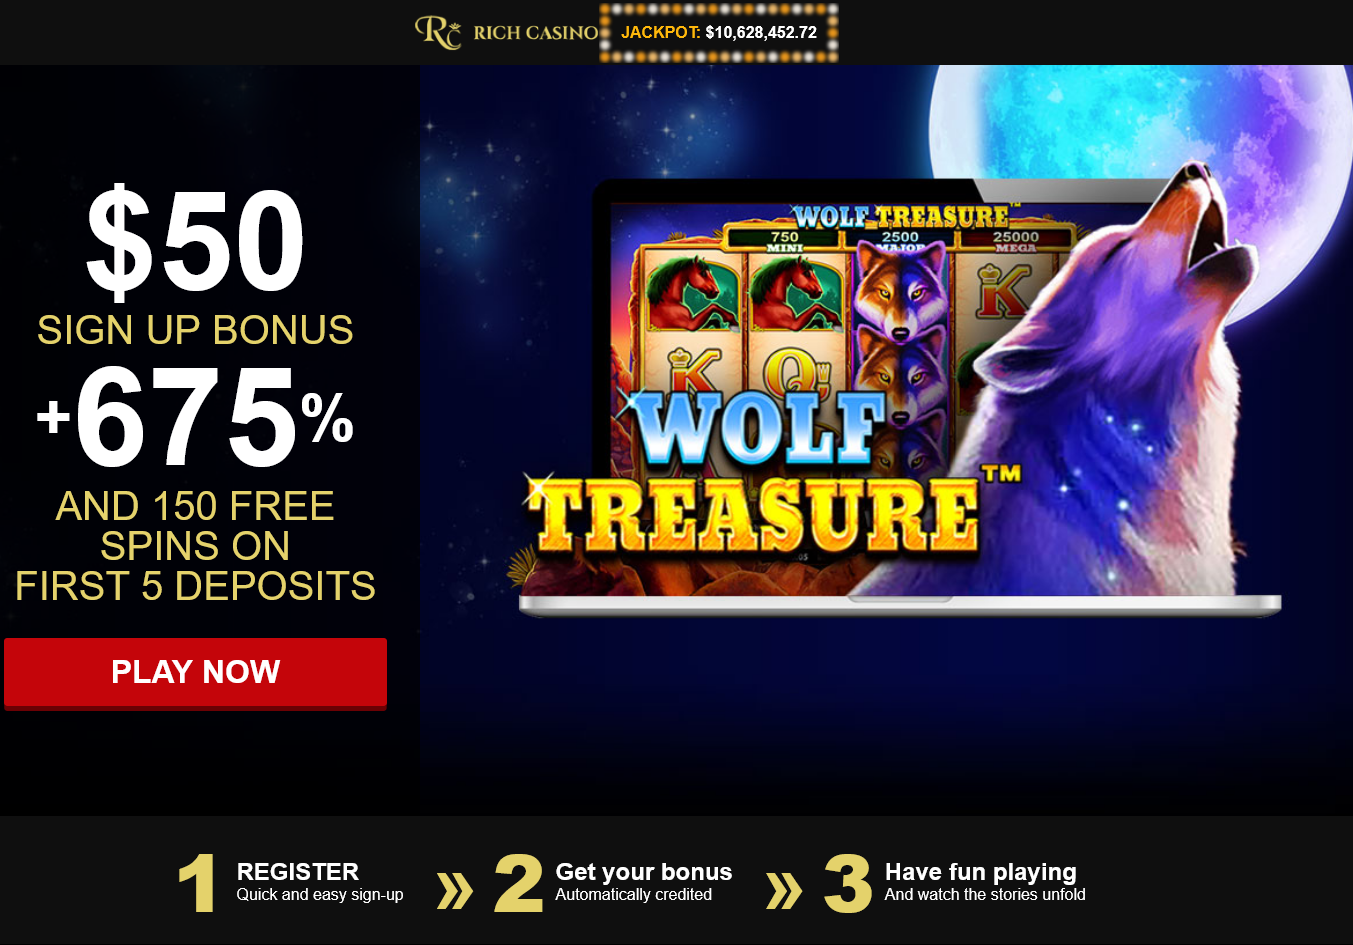 $50 SIGN UP
                                BONUS + 675% AND 150 FREE SPINS ON FIRST
                                5 DEPOSITS